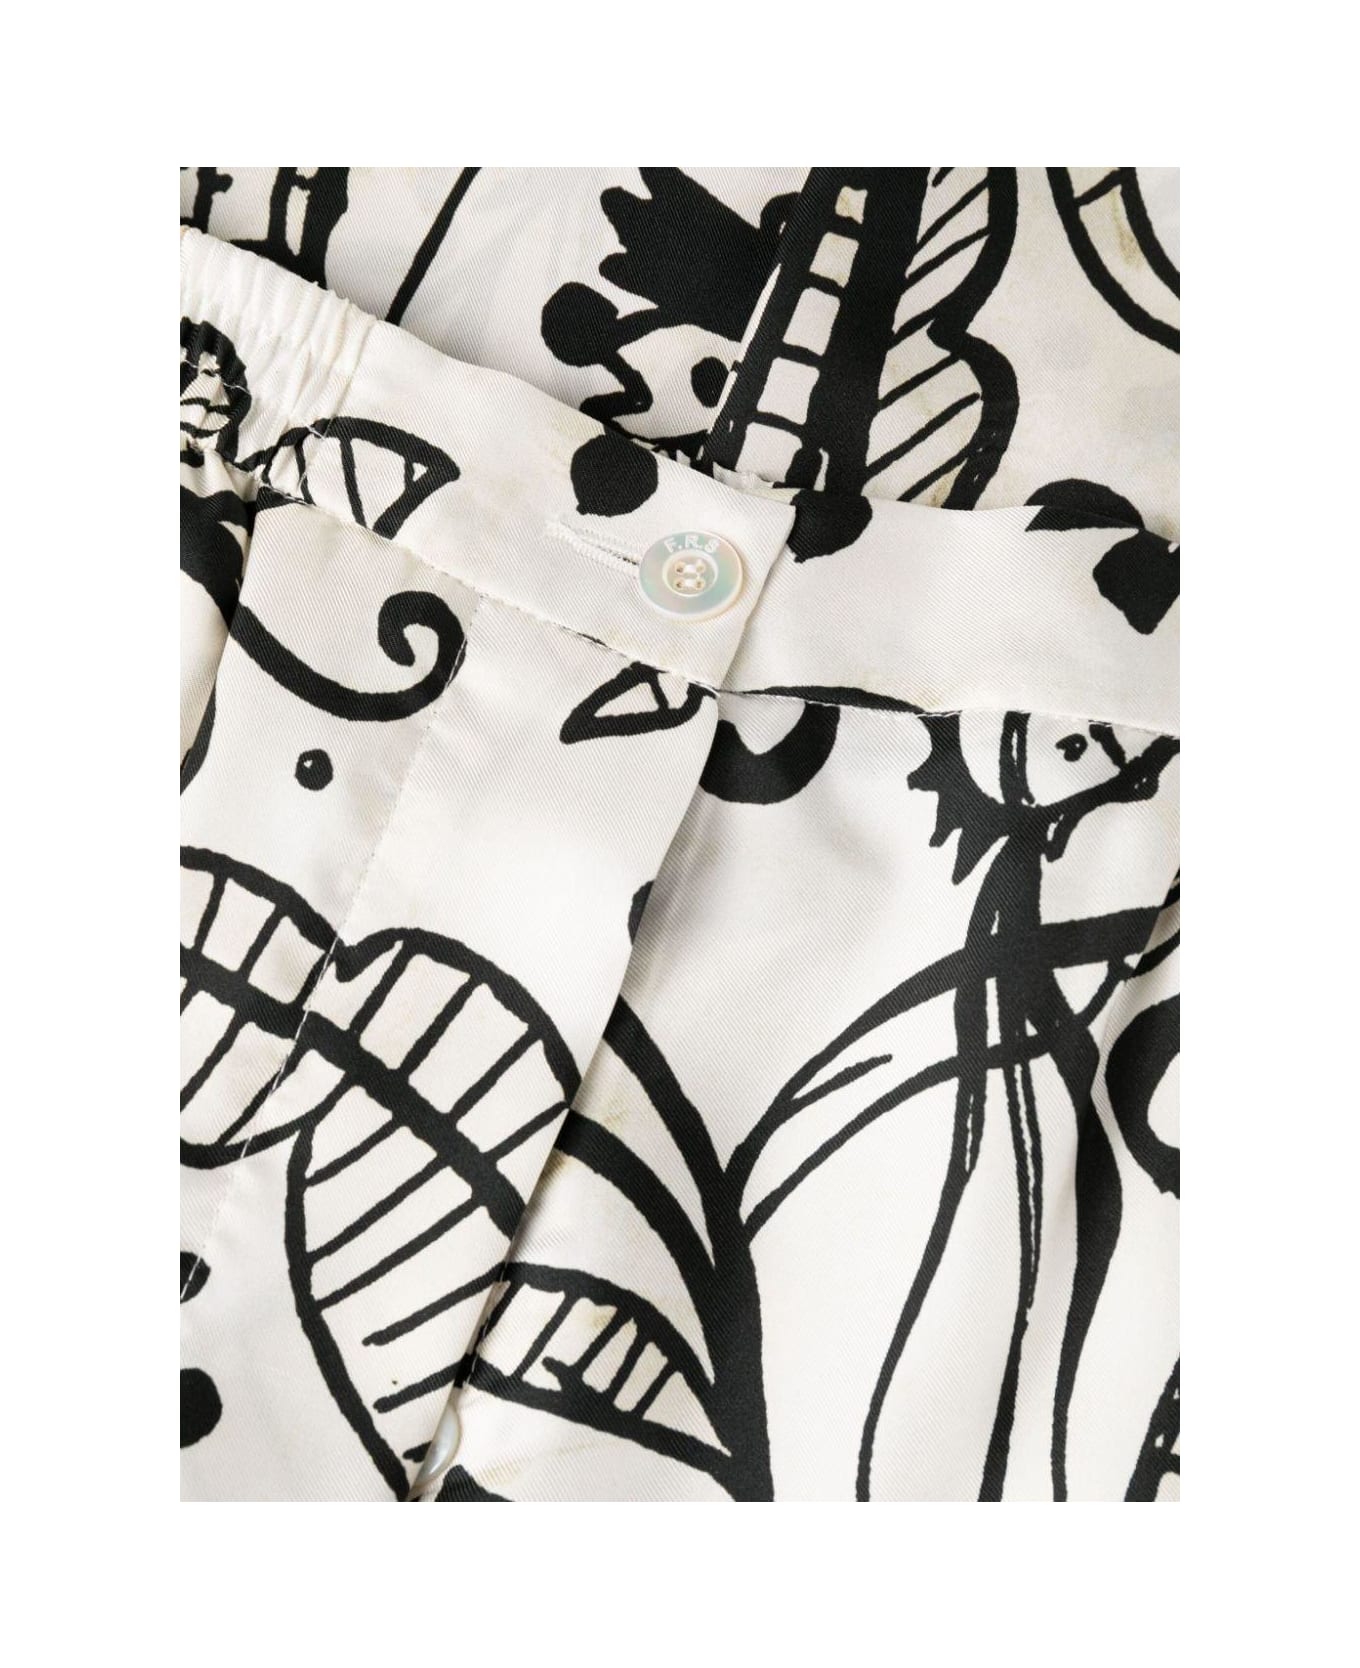 For Restless Sleepers All-over Print Pants - Bianco